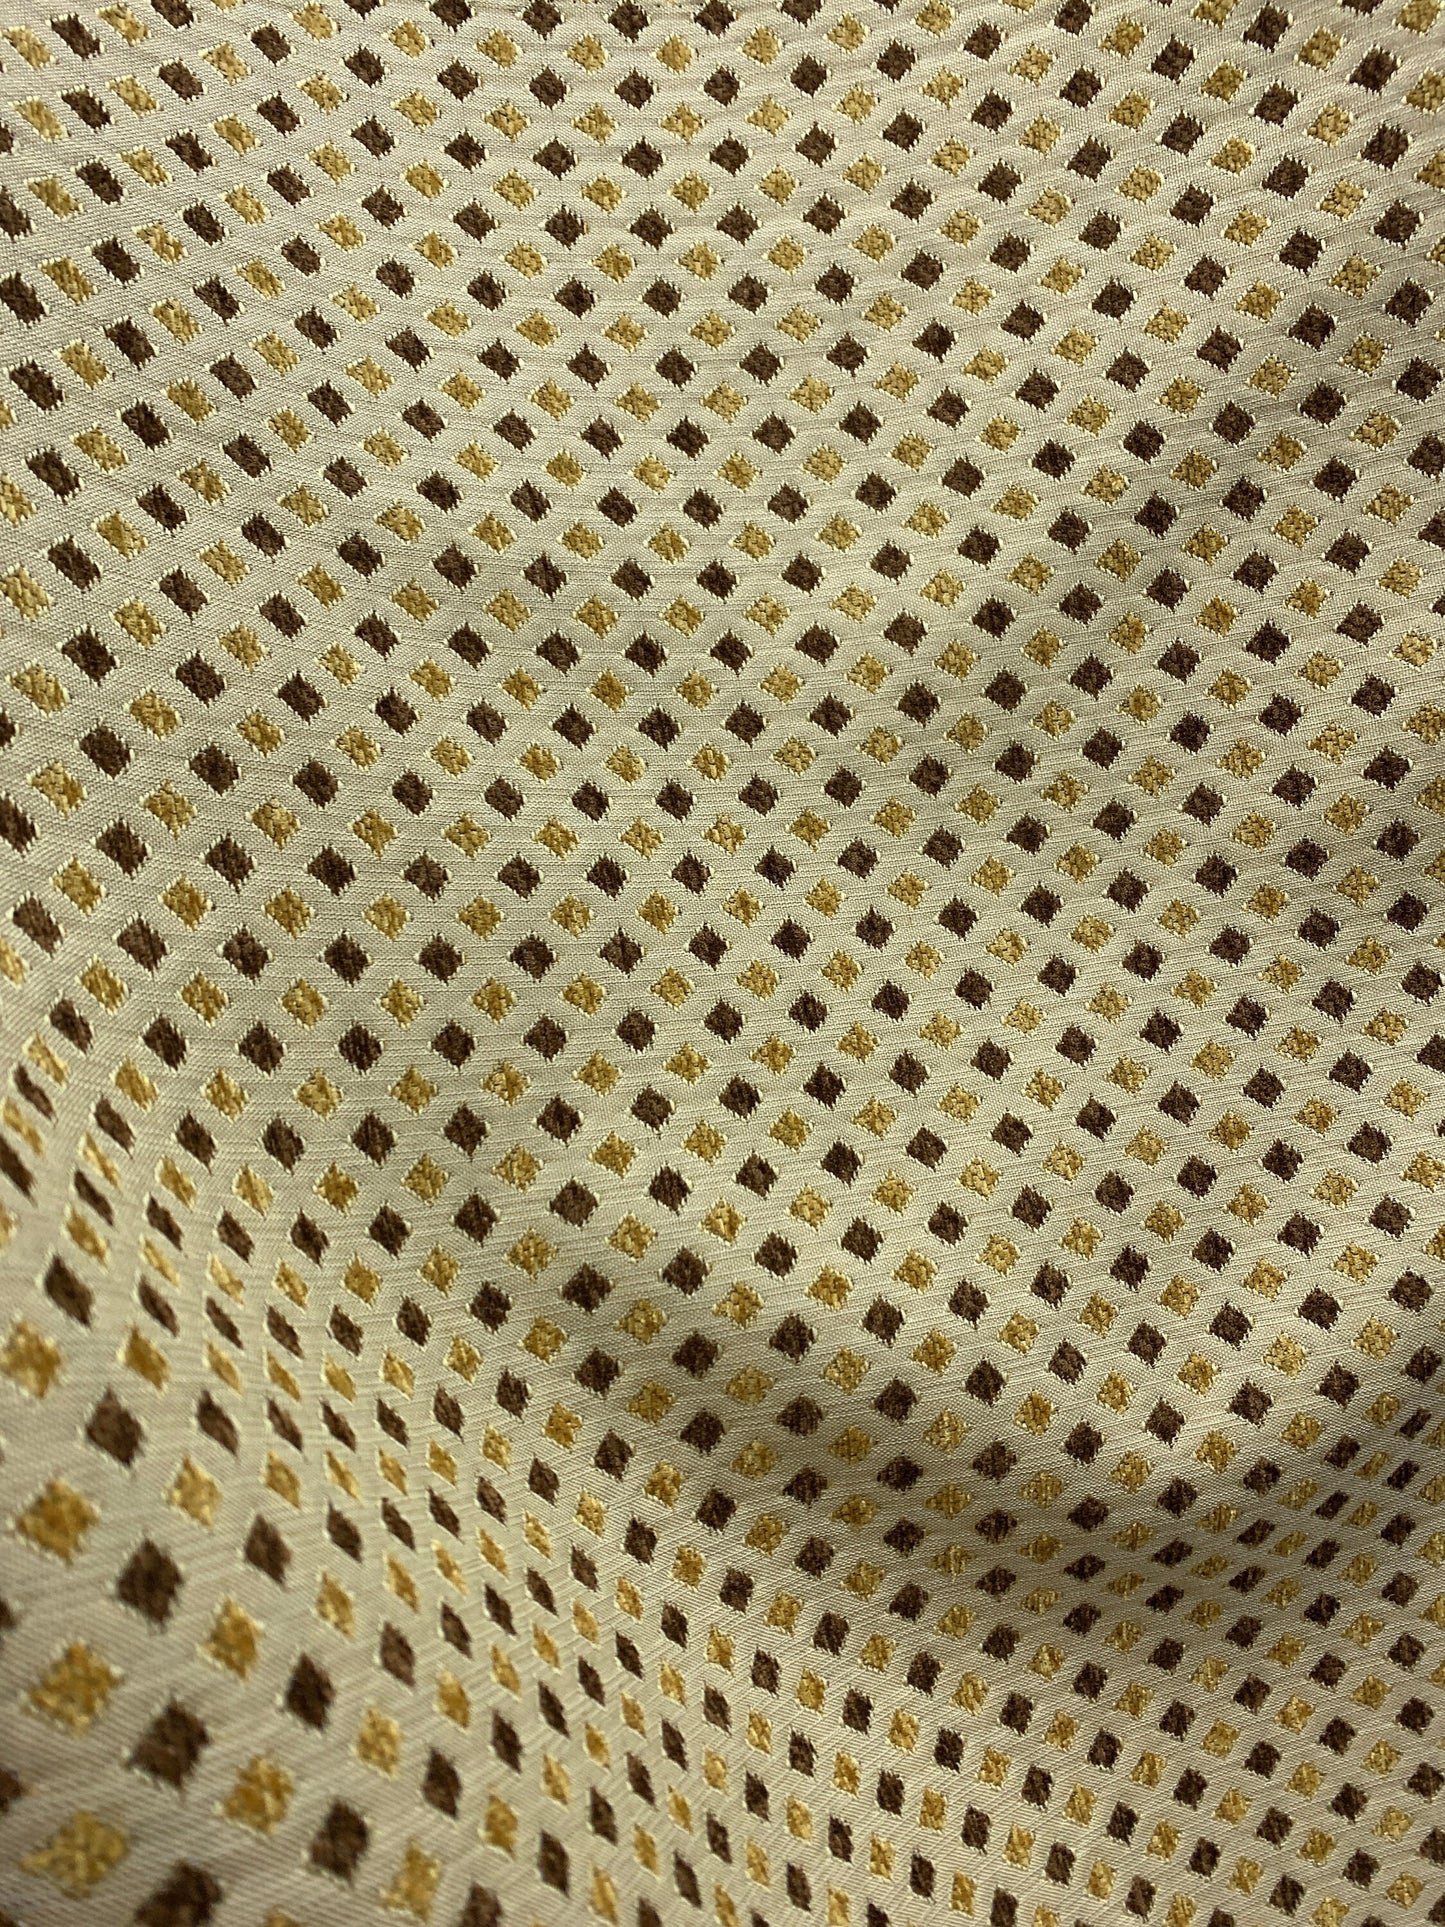 GOLD BROWN BEIGE Diamond Chenille Upholstery Brocade Fabric (56 in.) Sold By The Yard